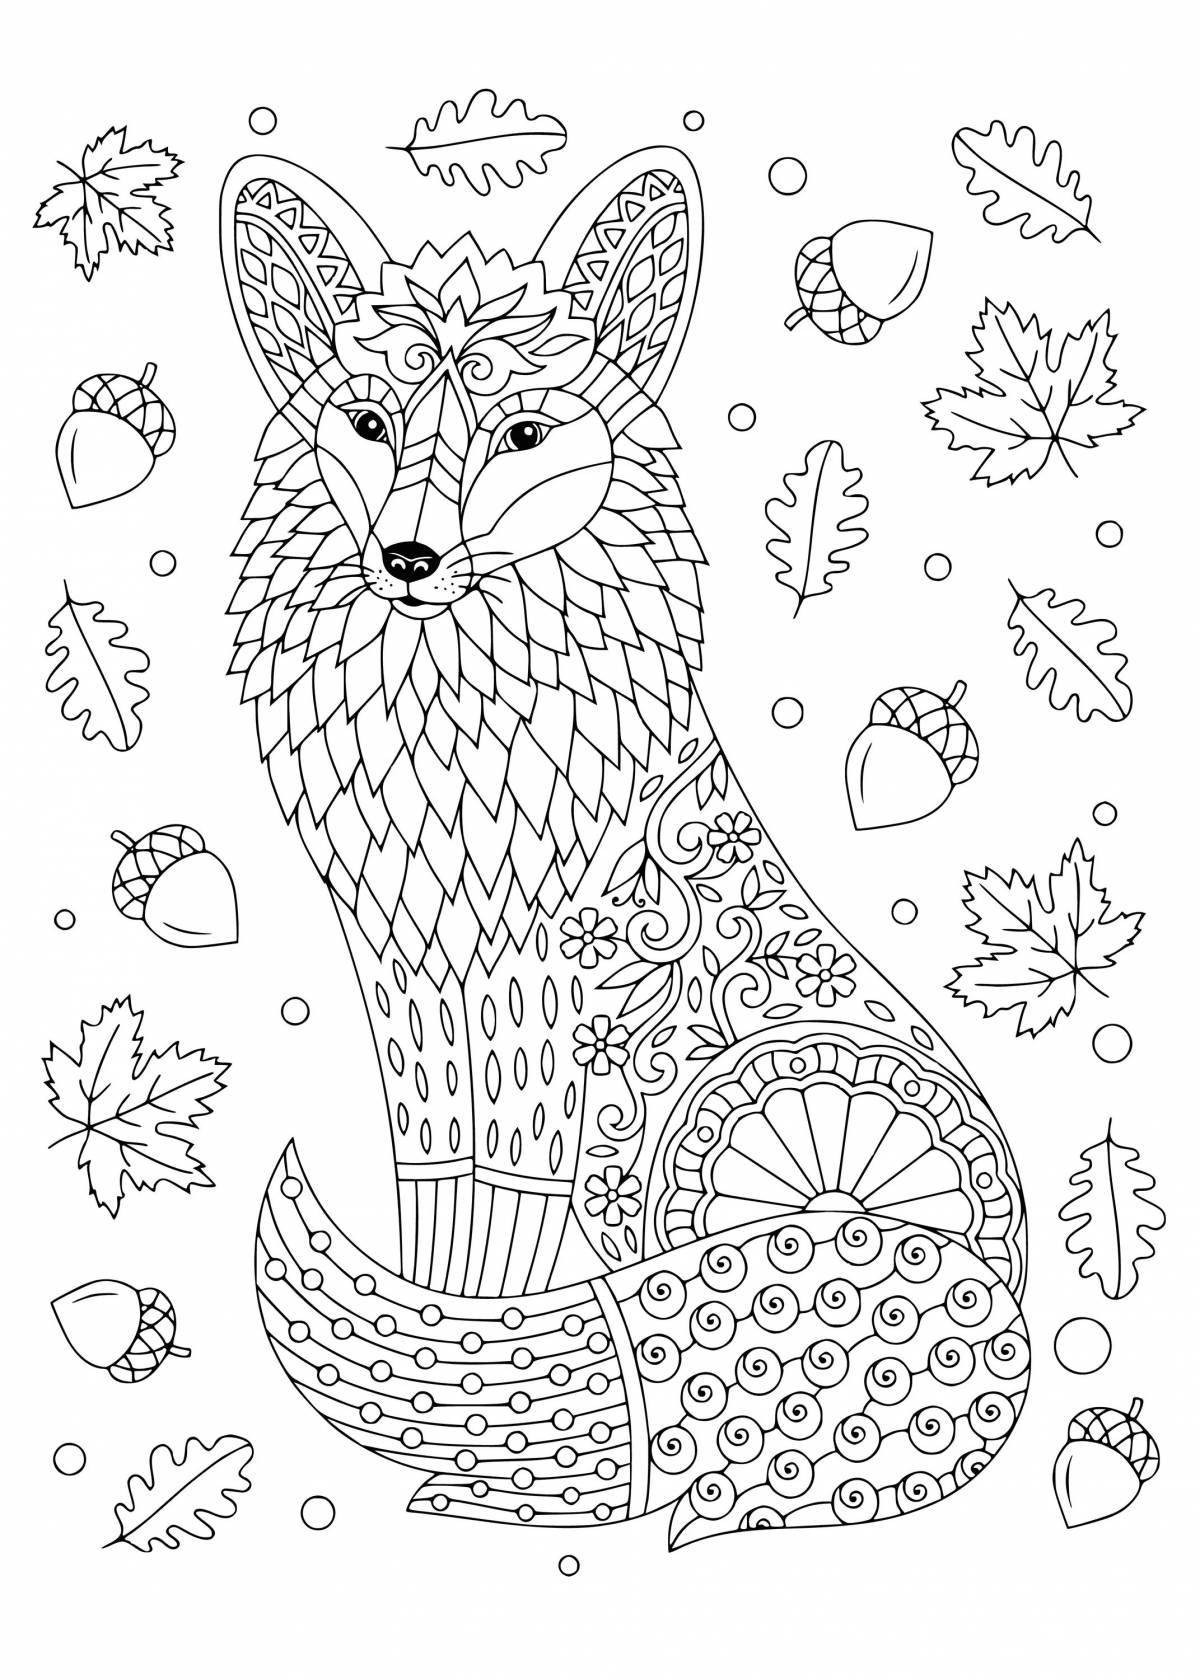 Exciting coloring fox by numbers